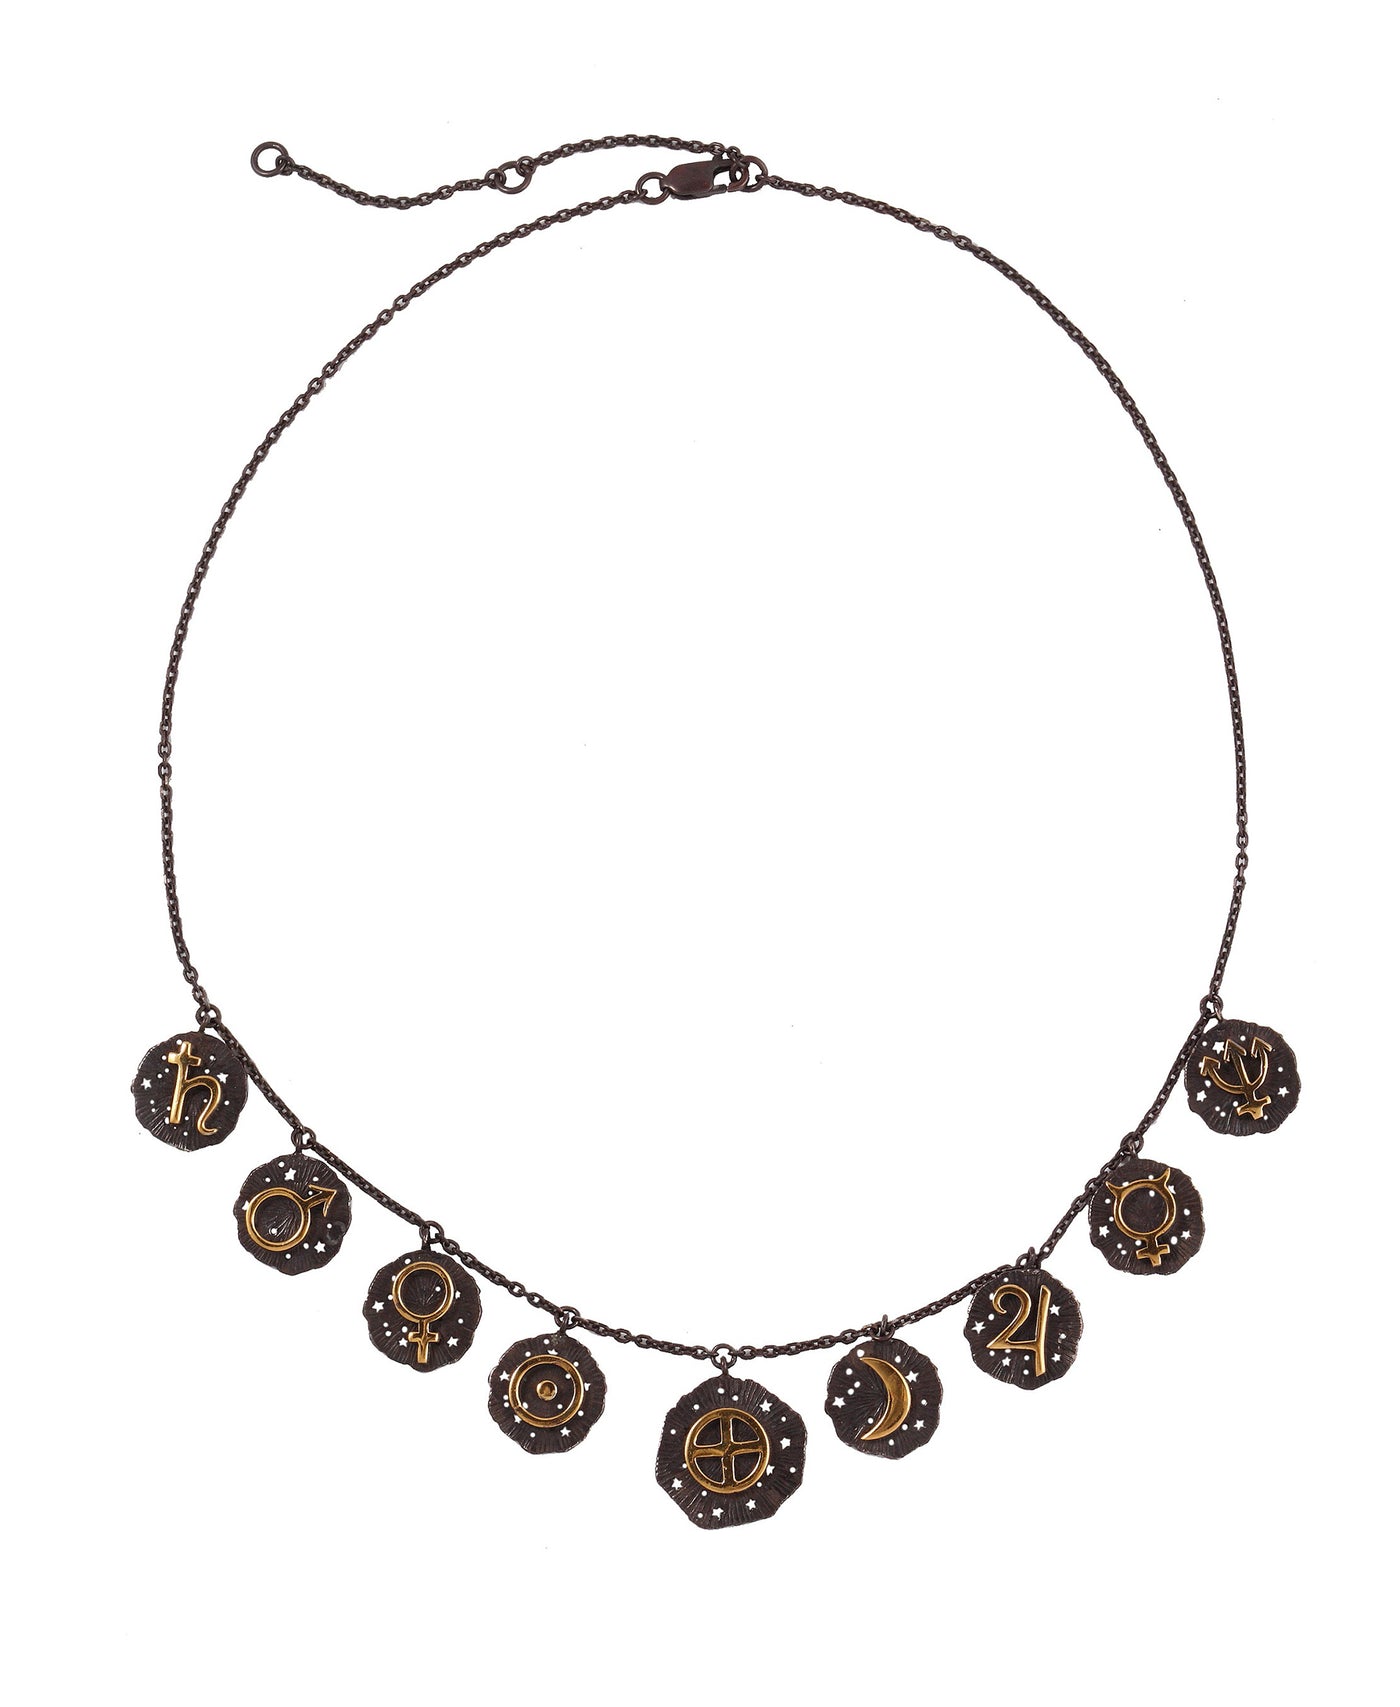 All planets necklace. Silver, gold-plated, oxidized